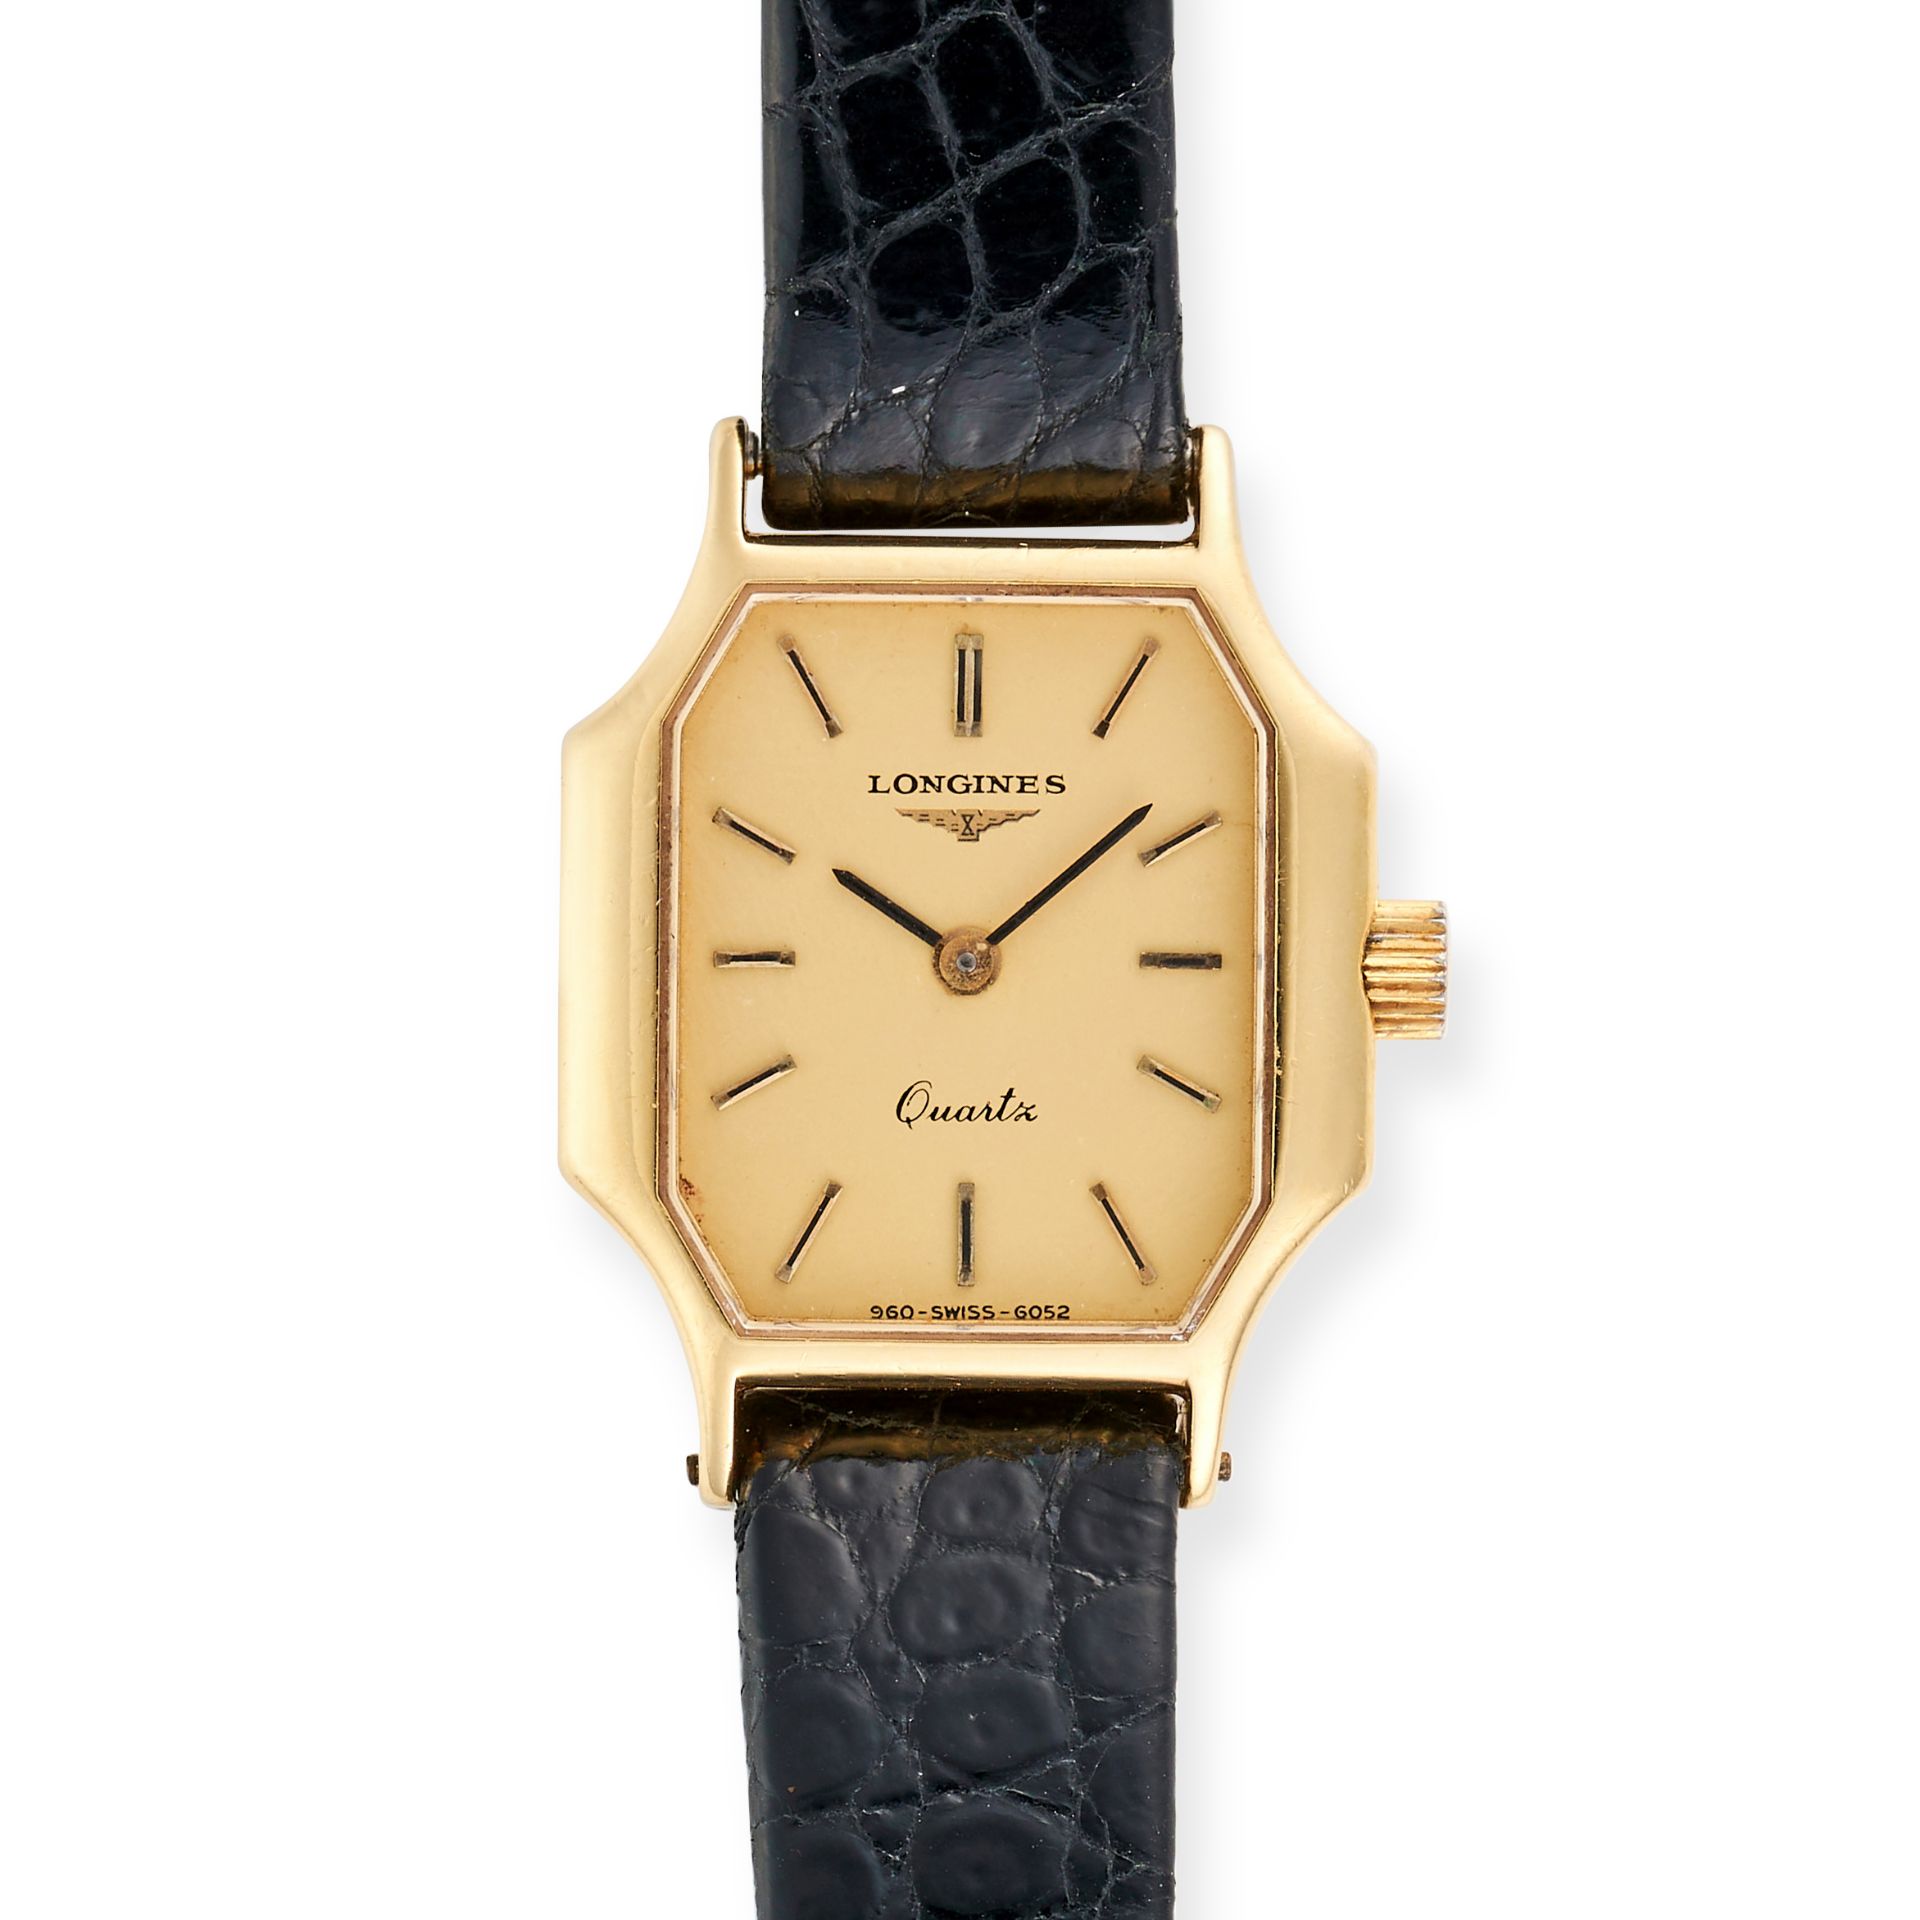 LONGINES - A LONGINES WRISTWATCH in 18ct gold rectangular case, signed gilt dial with baton marke...